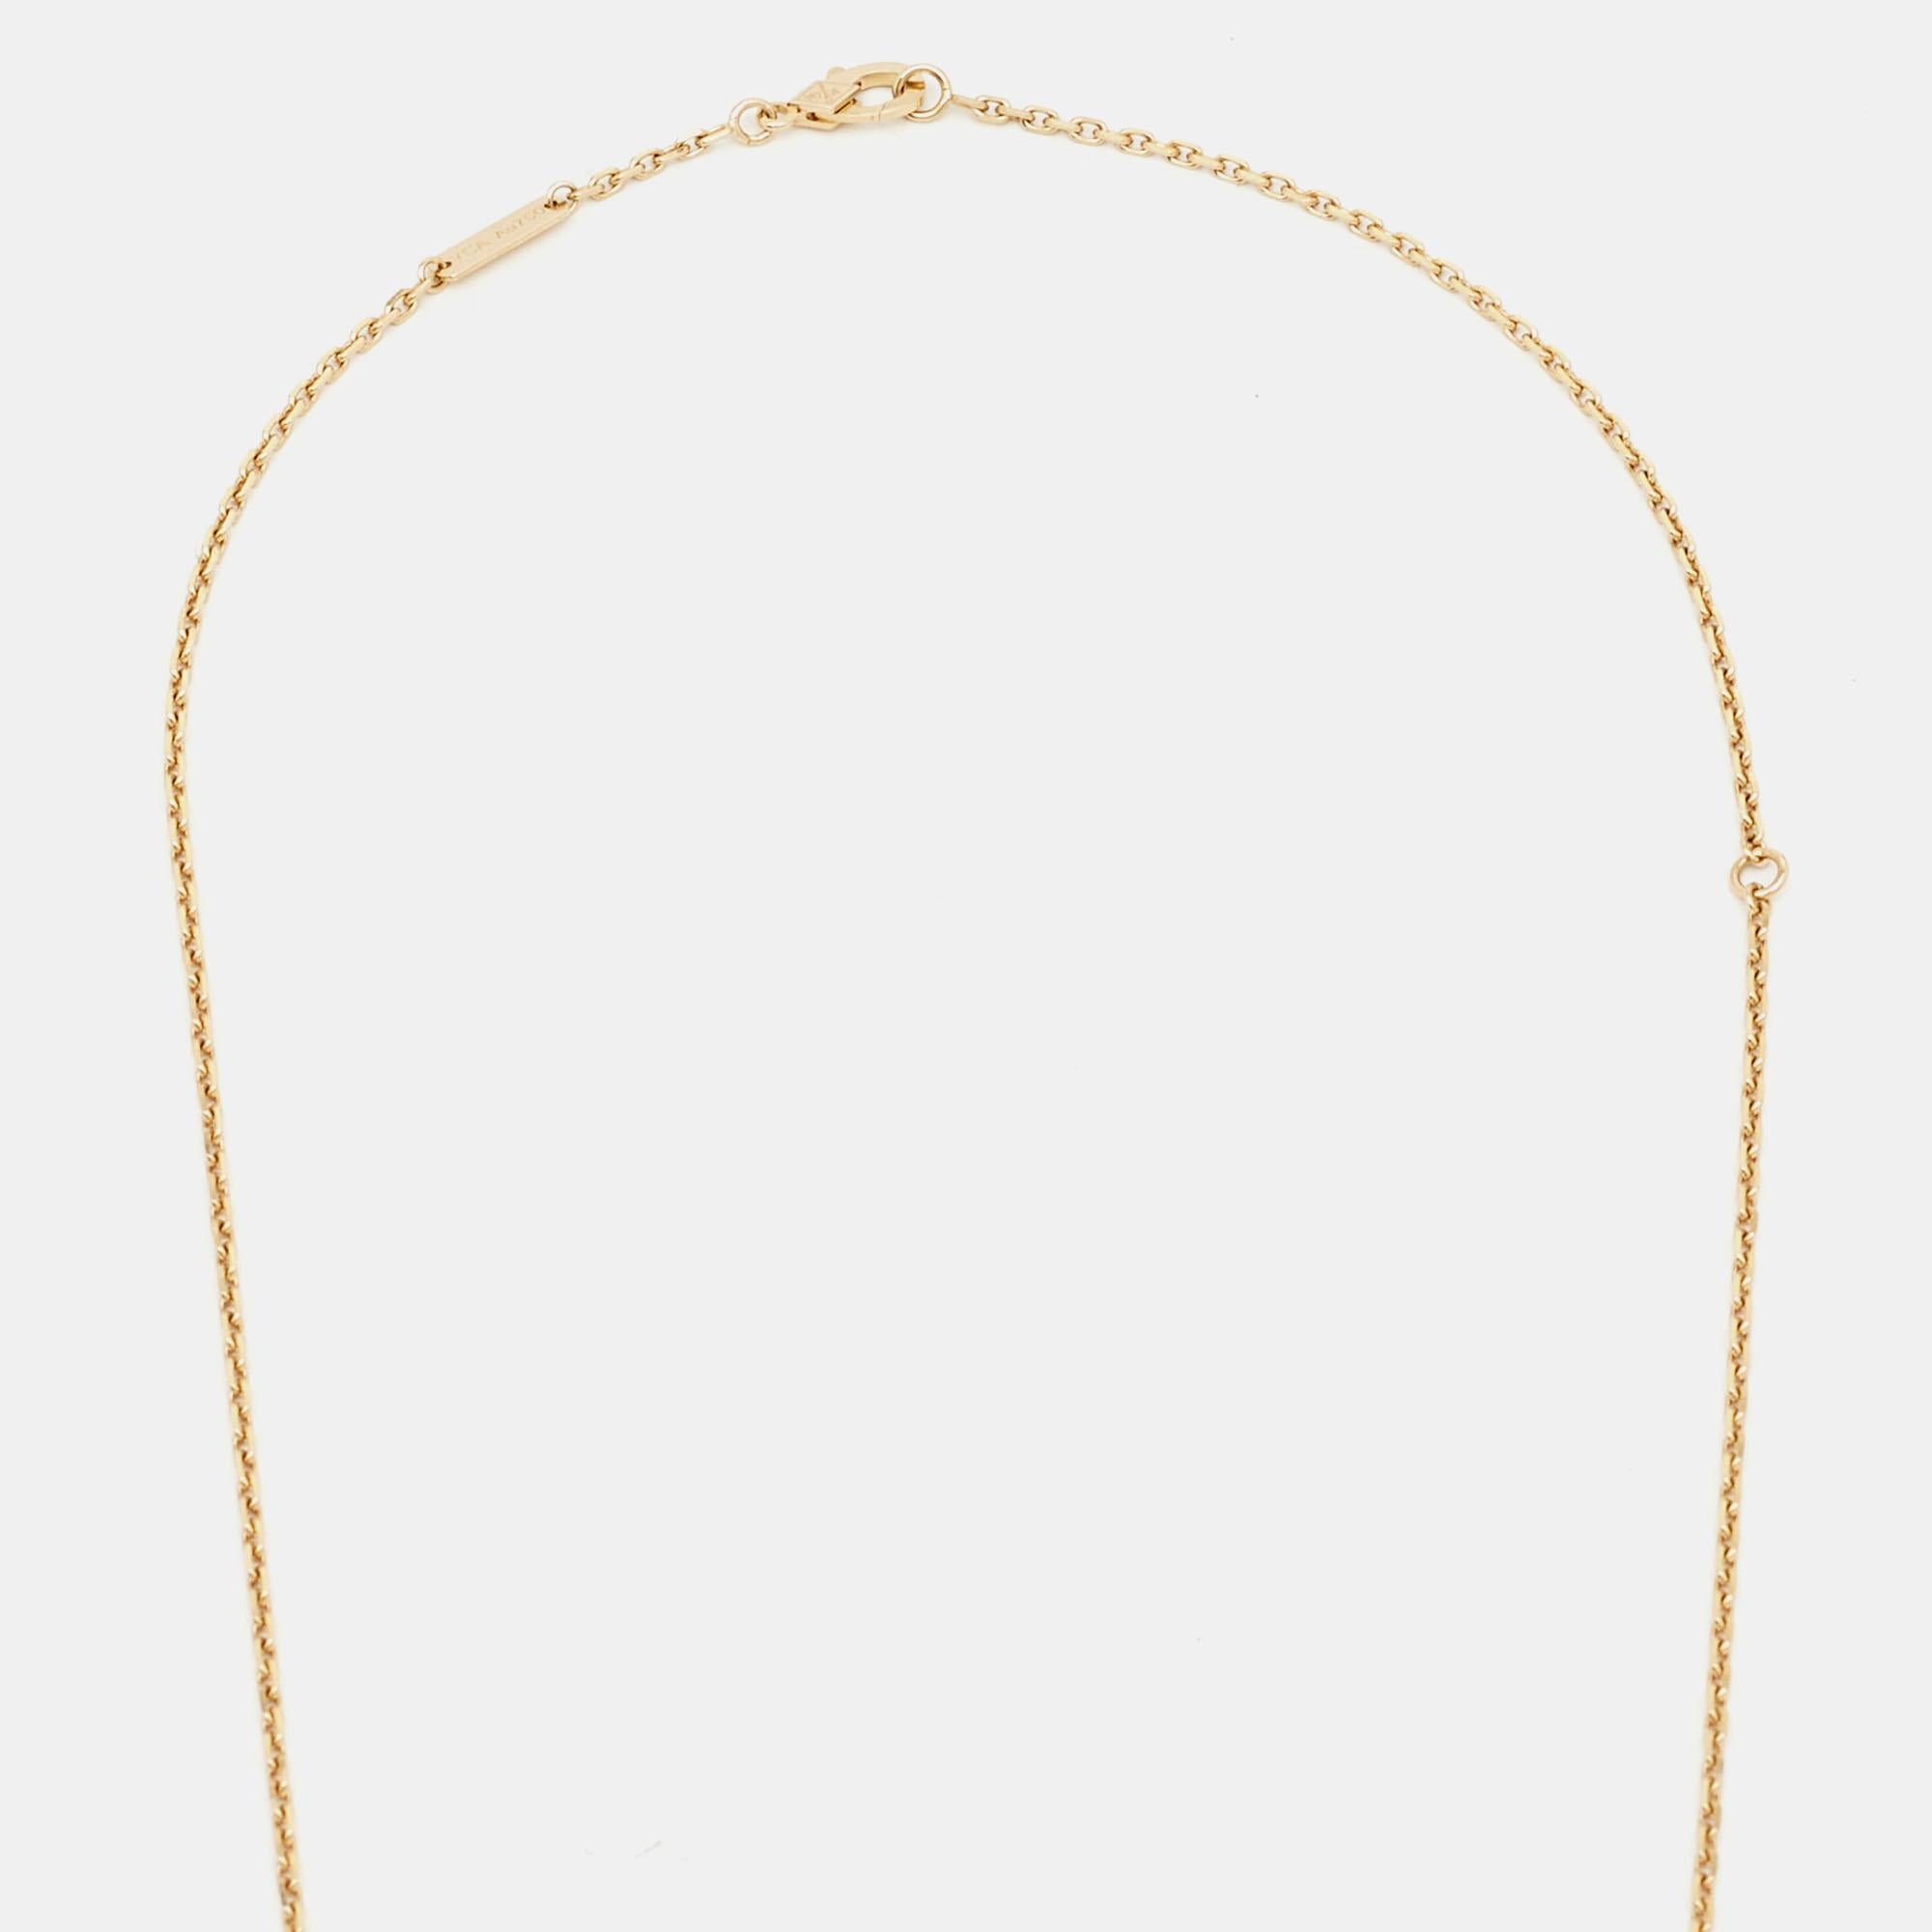 Crafted with precision and finesse, the Van Cleef & Arpels chain epitomizes elegance. Each link, meticulously formed, creates a seamless cascade of radiant gold. Its understated luxury speaks volumes, elevating any ensemble with a timeless allure. A